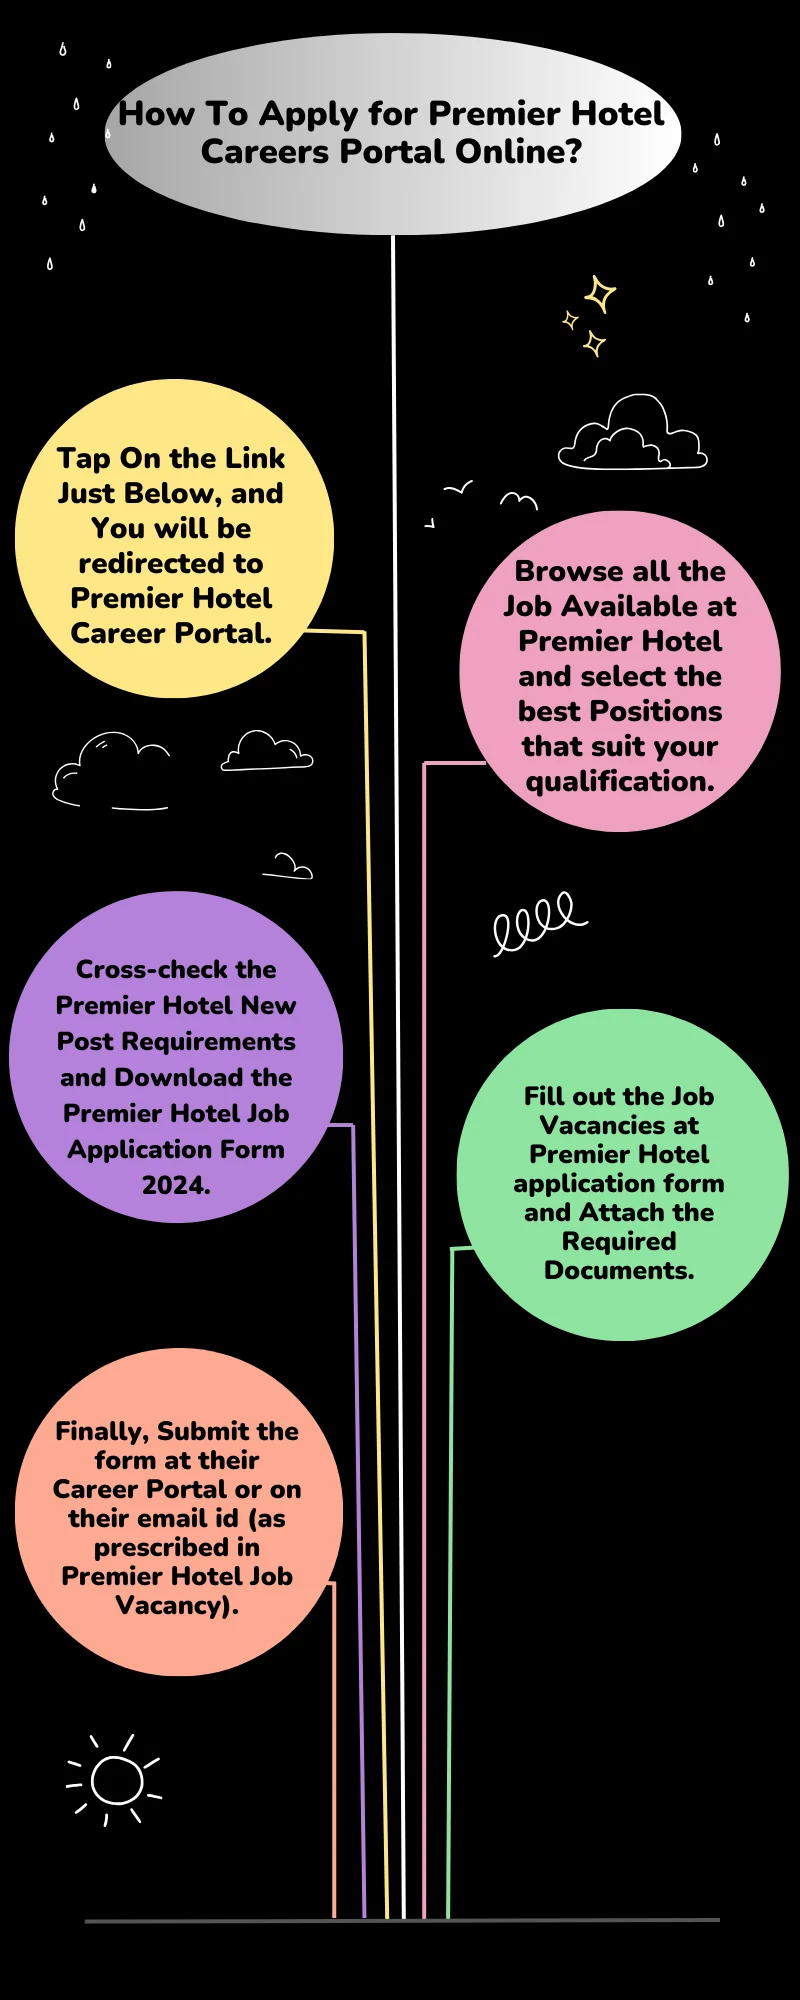 How To Apply for Premier Hotel Careers Portal Online?